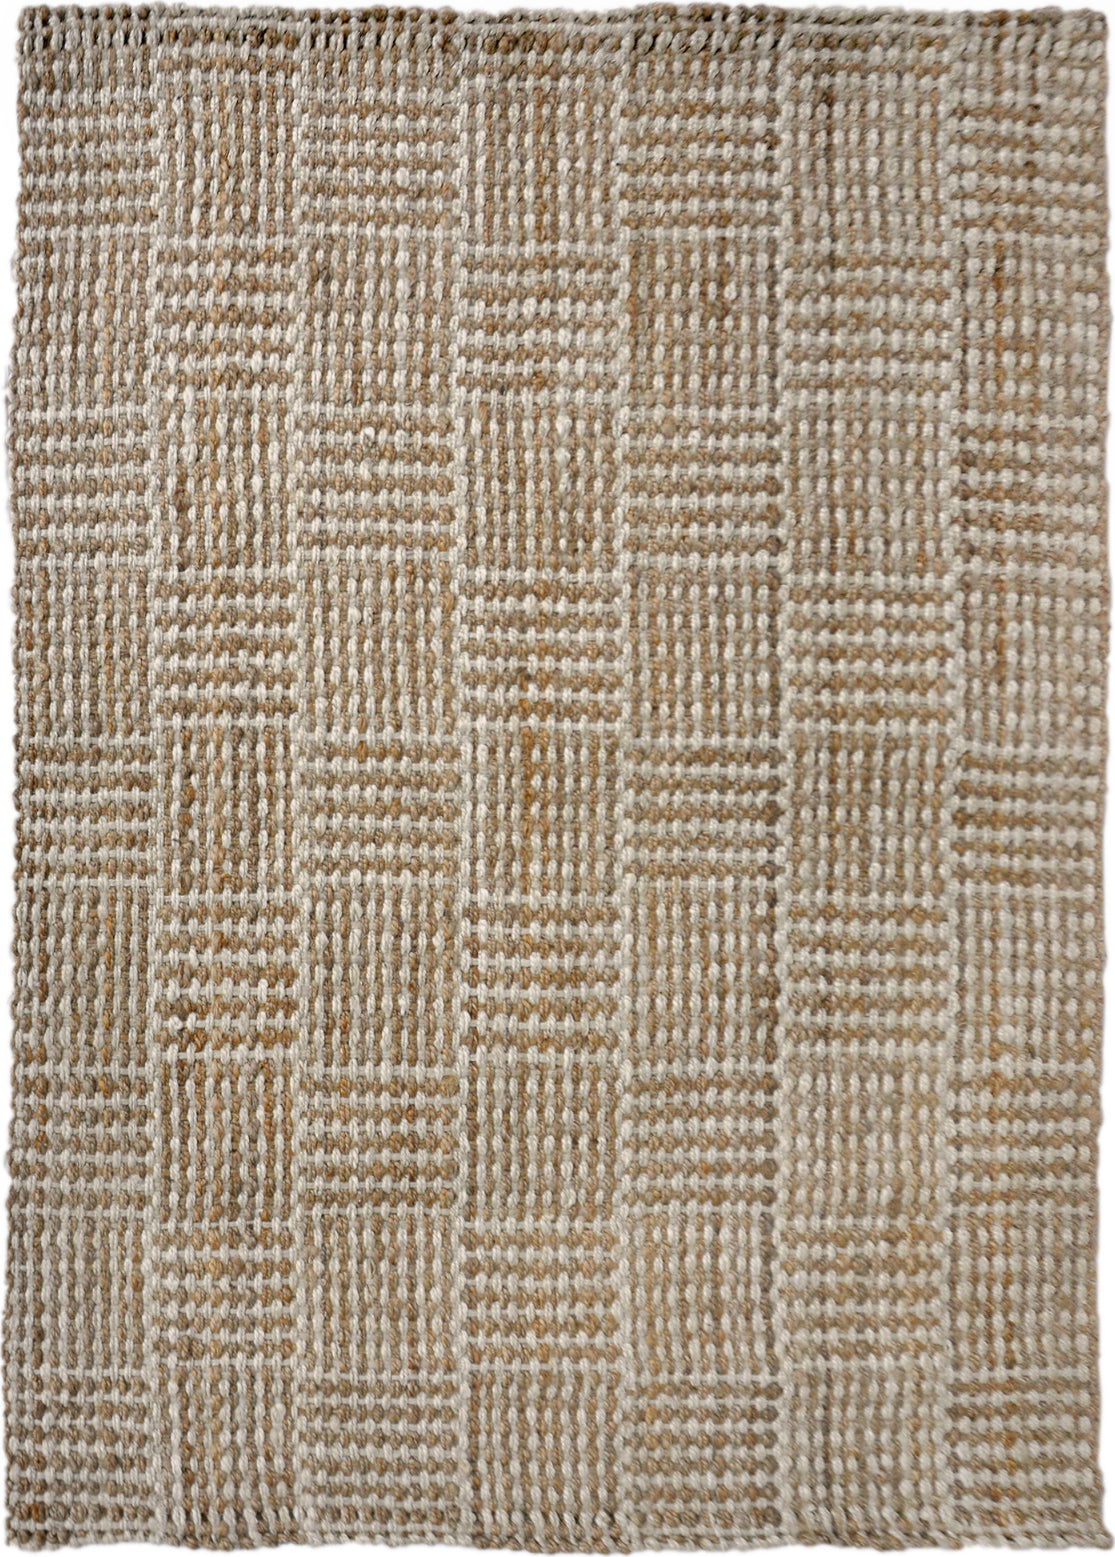 Trans Ocean Terra Squares Natural Area Rug Mirror by Liora Manne main image